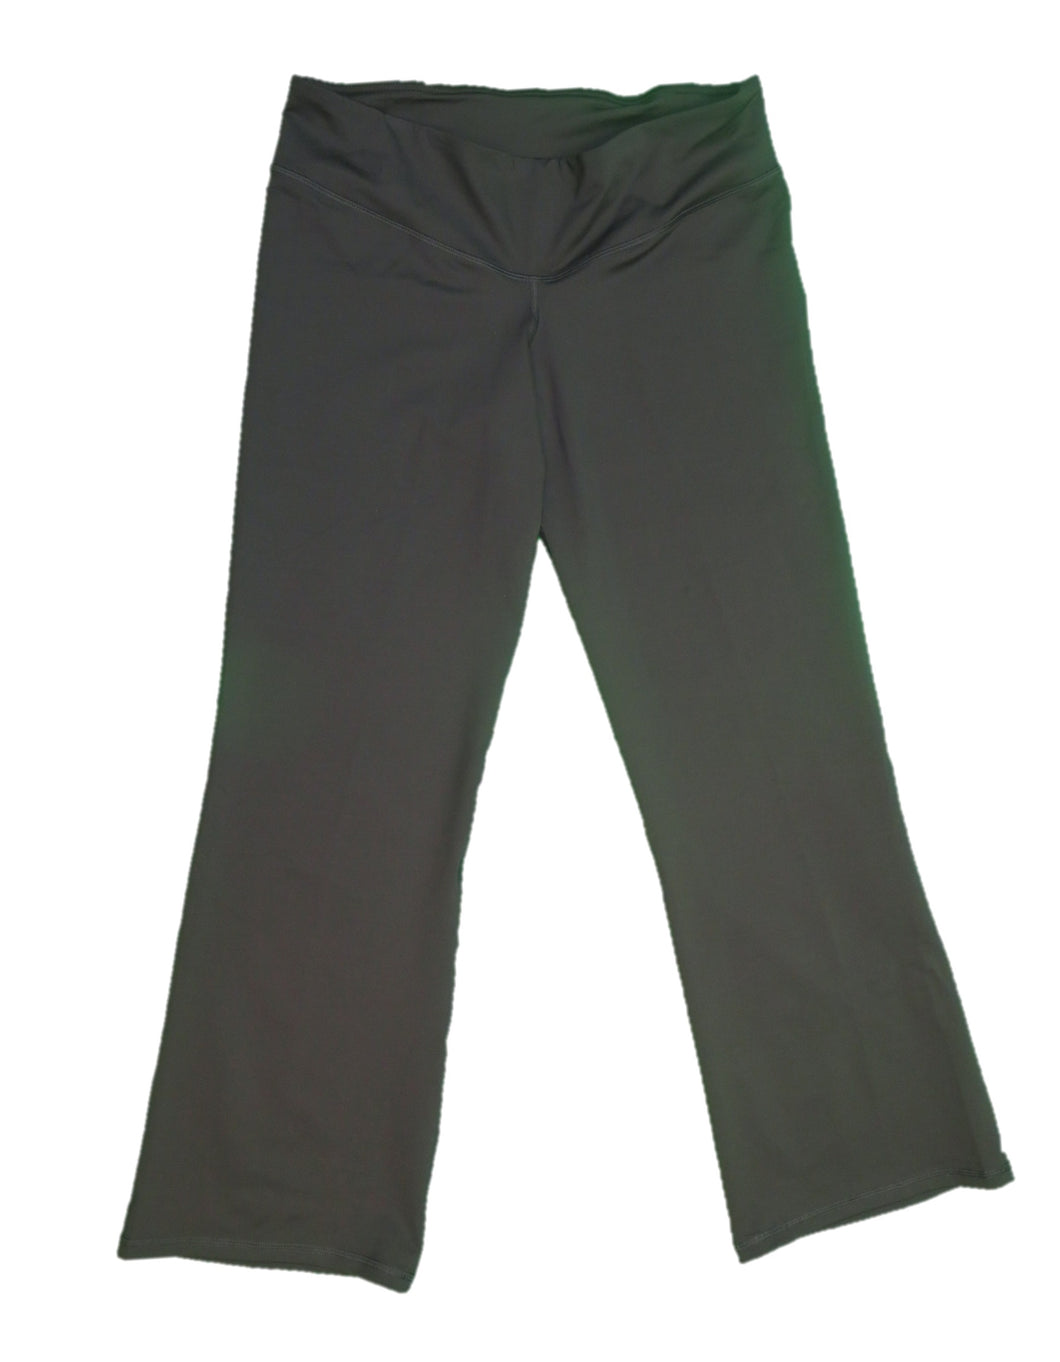 C9 by Champion Performance Flare Pant Style B9085